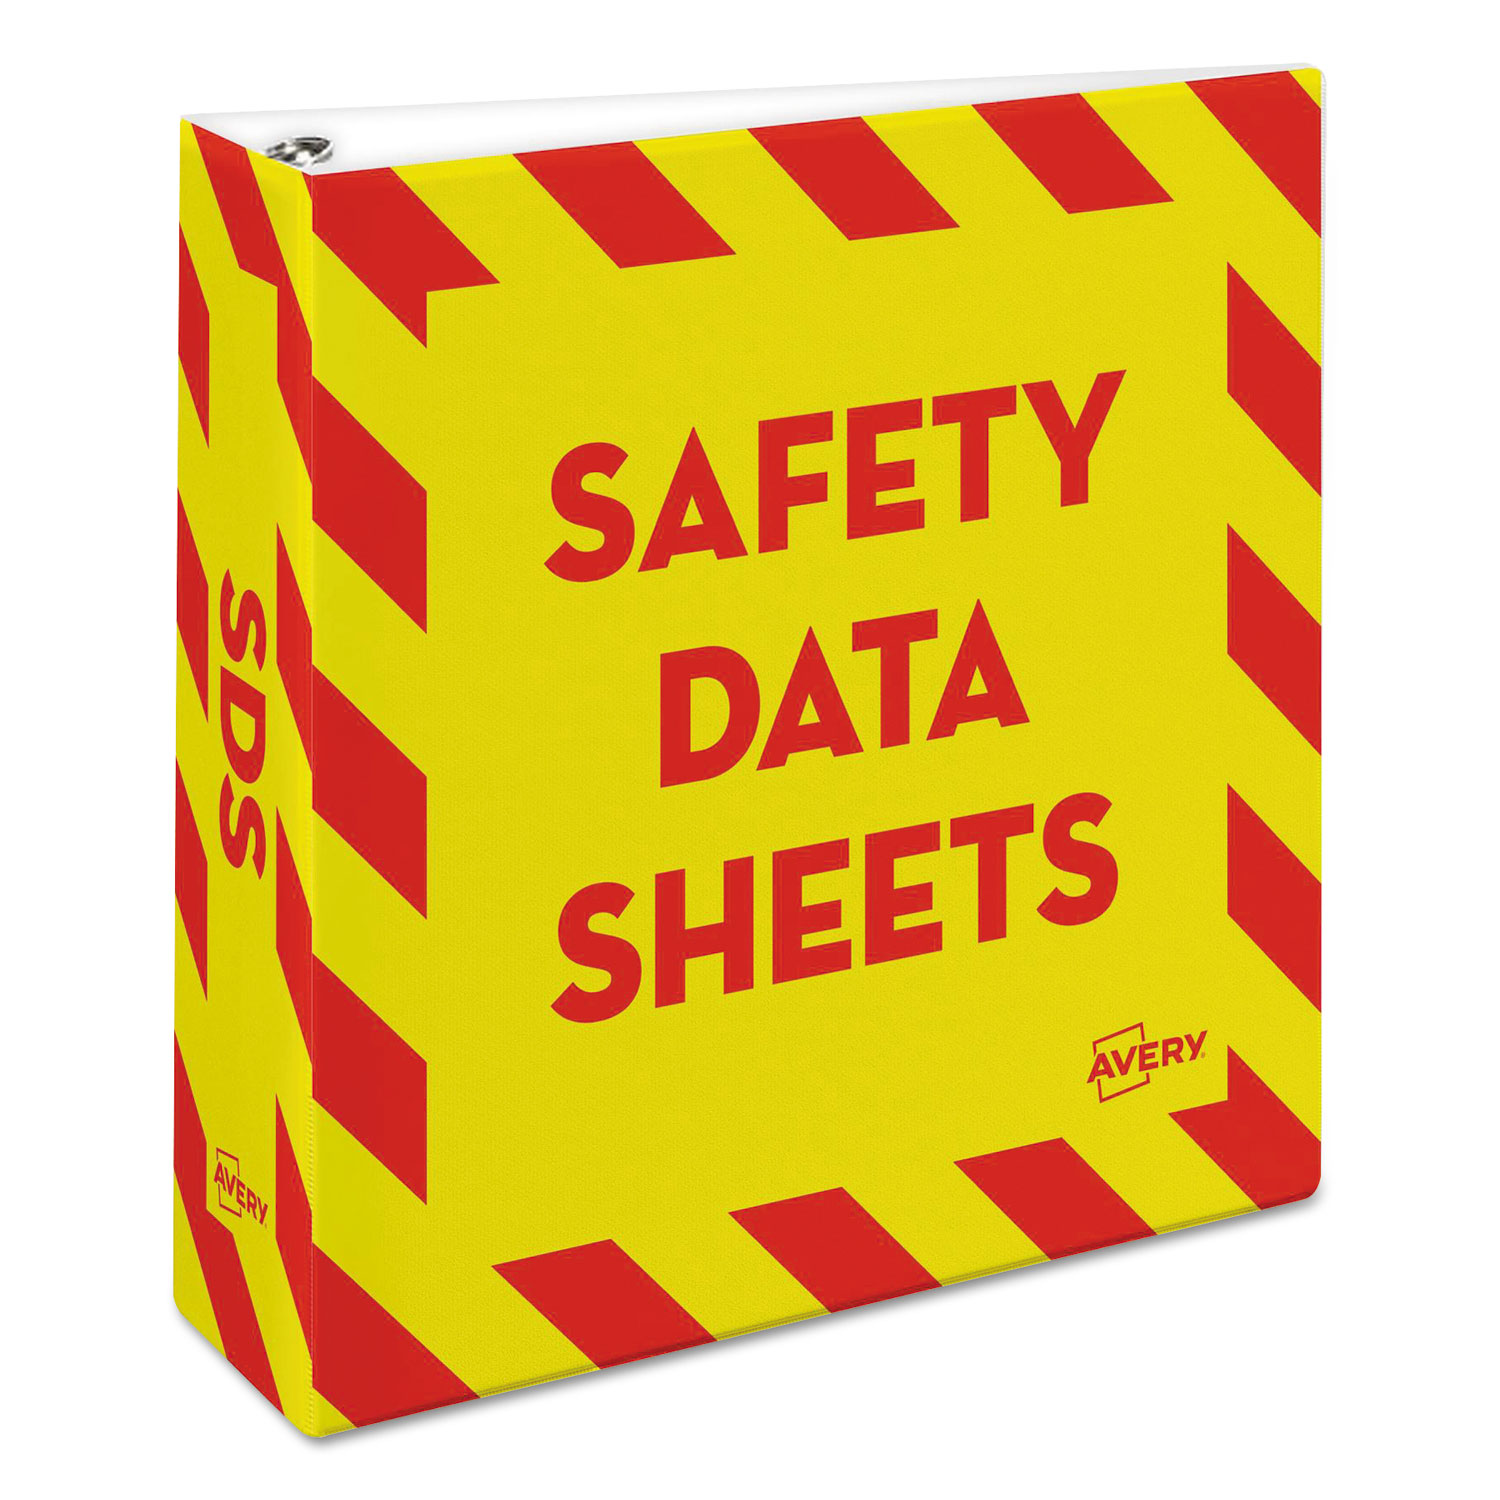  Avery 18952 Heavy-Duty Preprinted Safety Data Sheet Binder, 3 Rings, 3 Capacity, 11 x 8.5, Yellow/Red (AVE18952) 